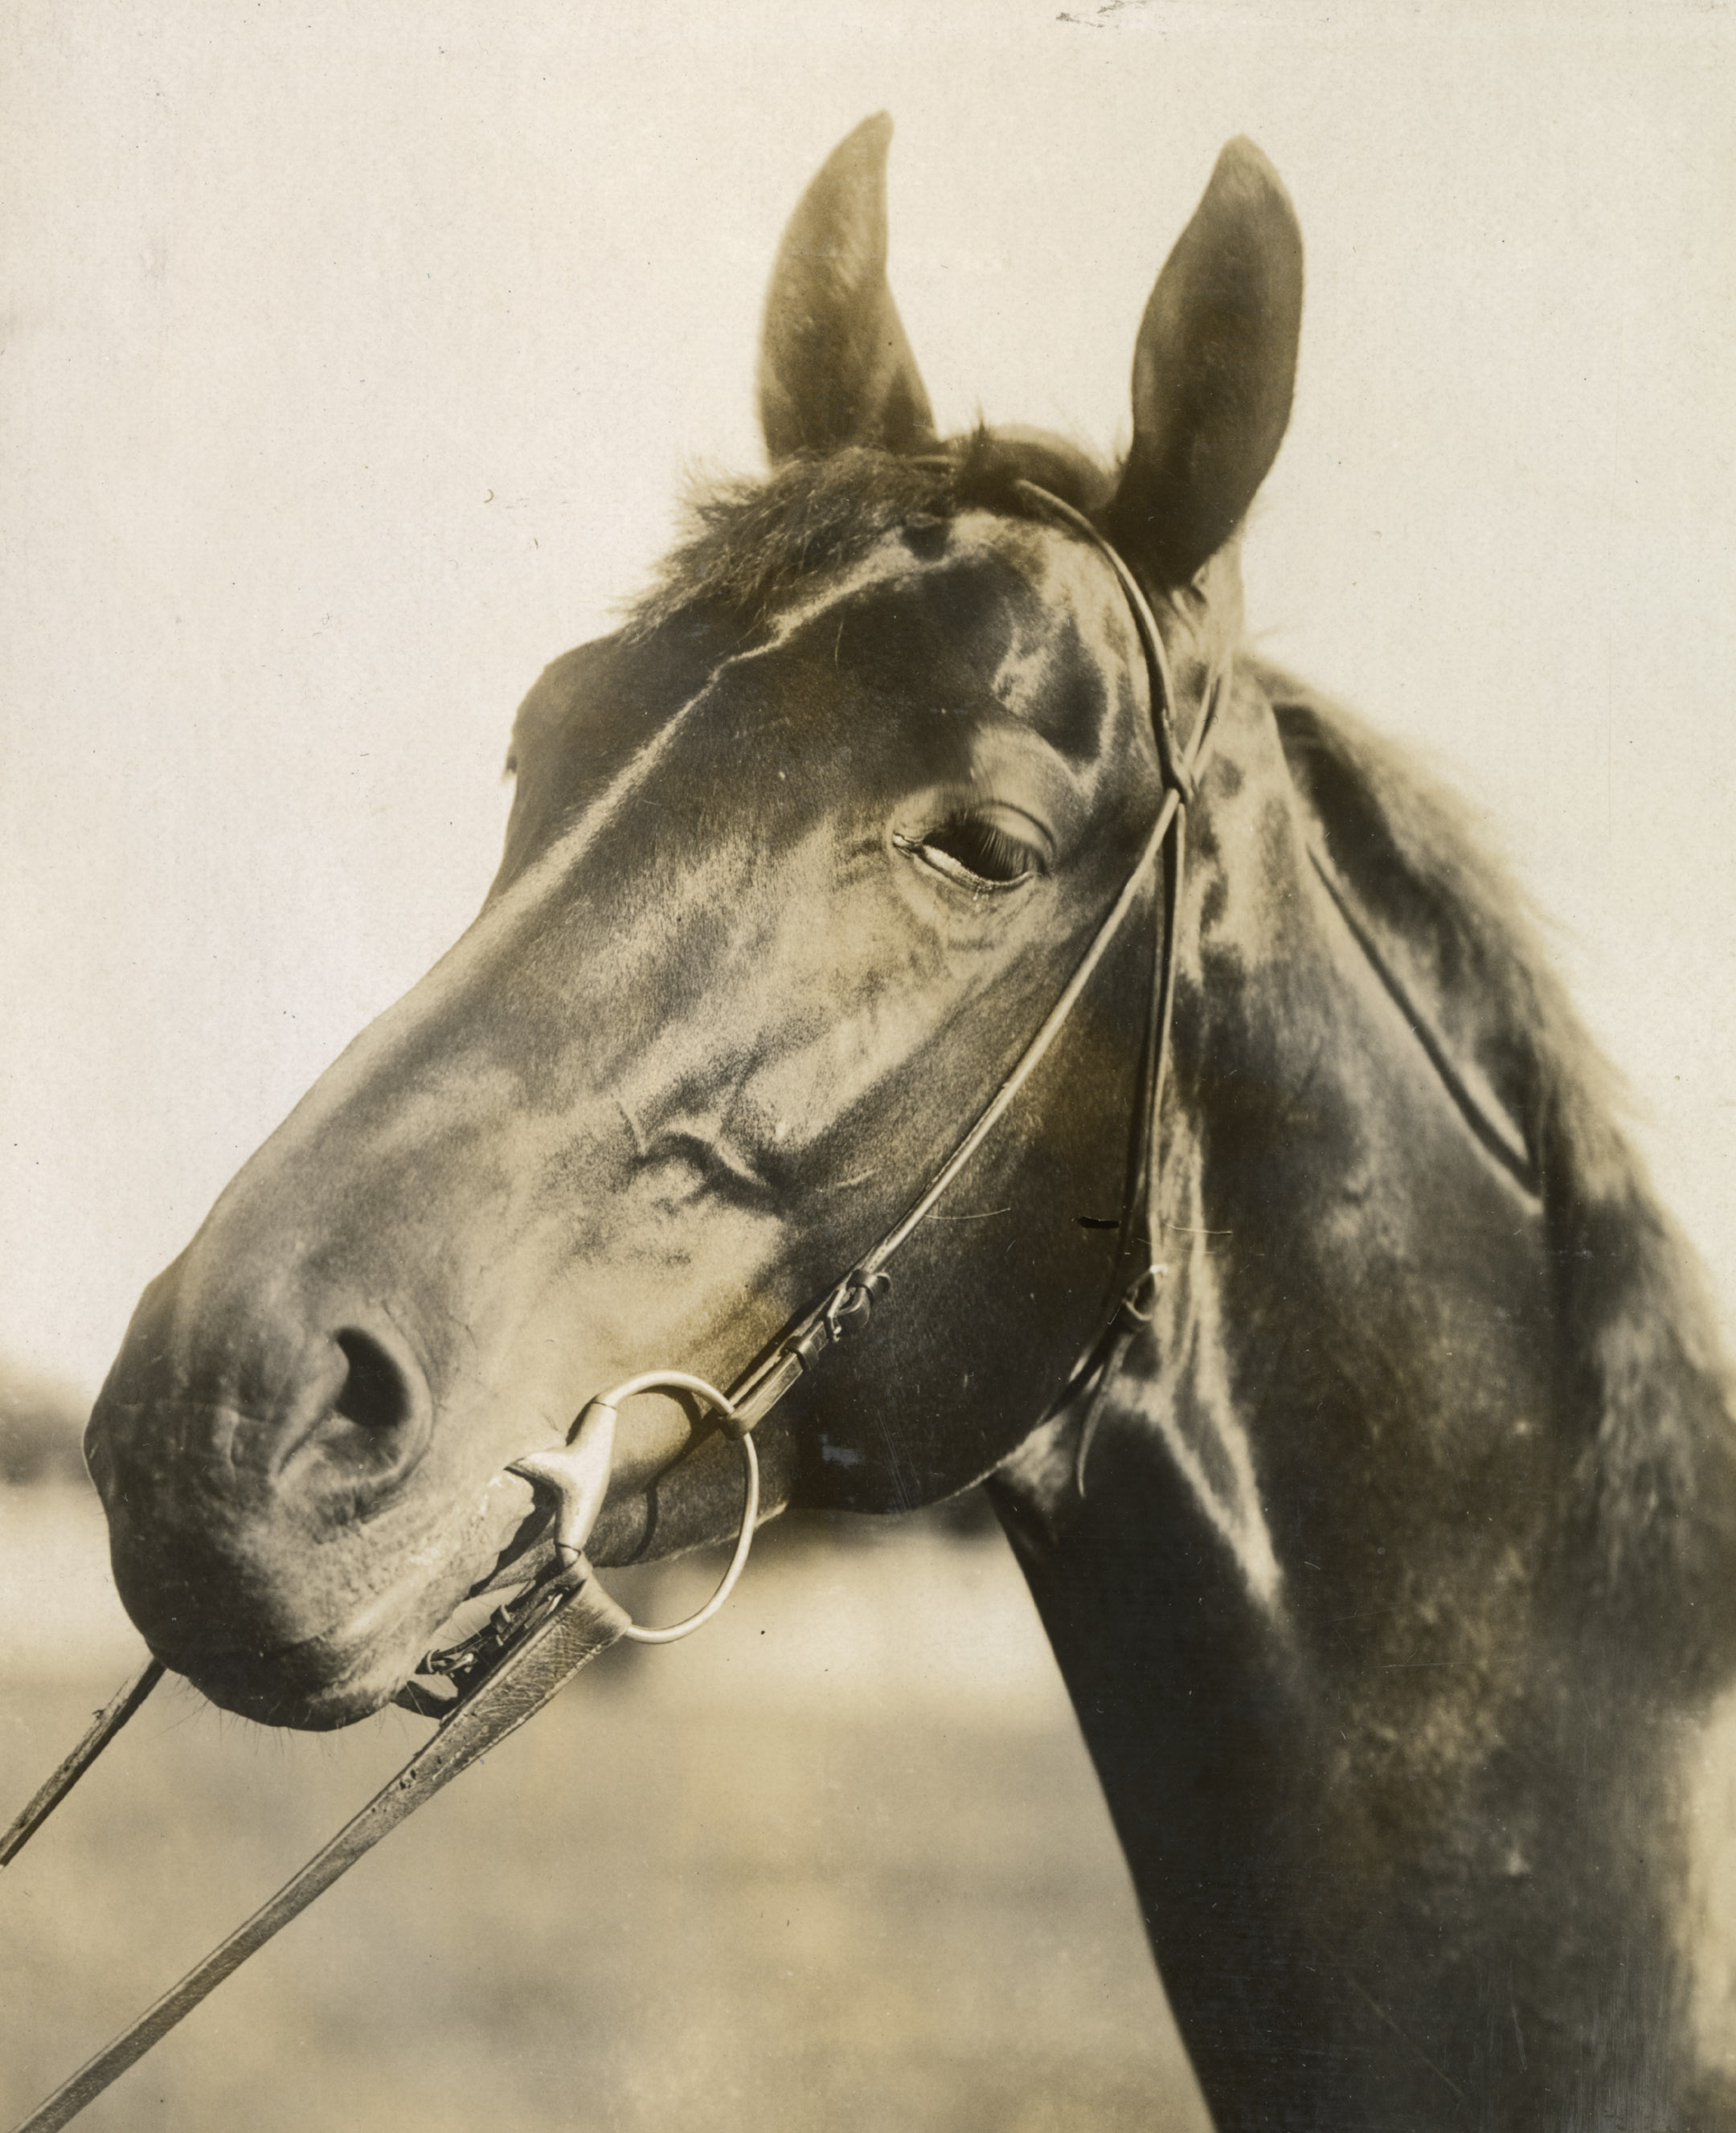 Undated portrait of Clifford (Keeneland Library Hemment Collection)